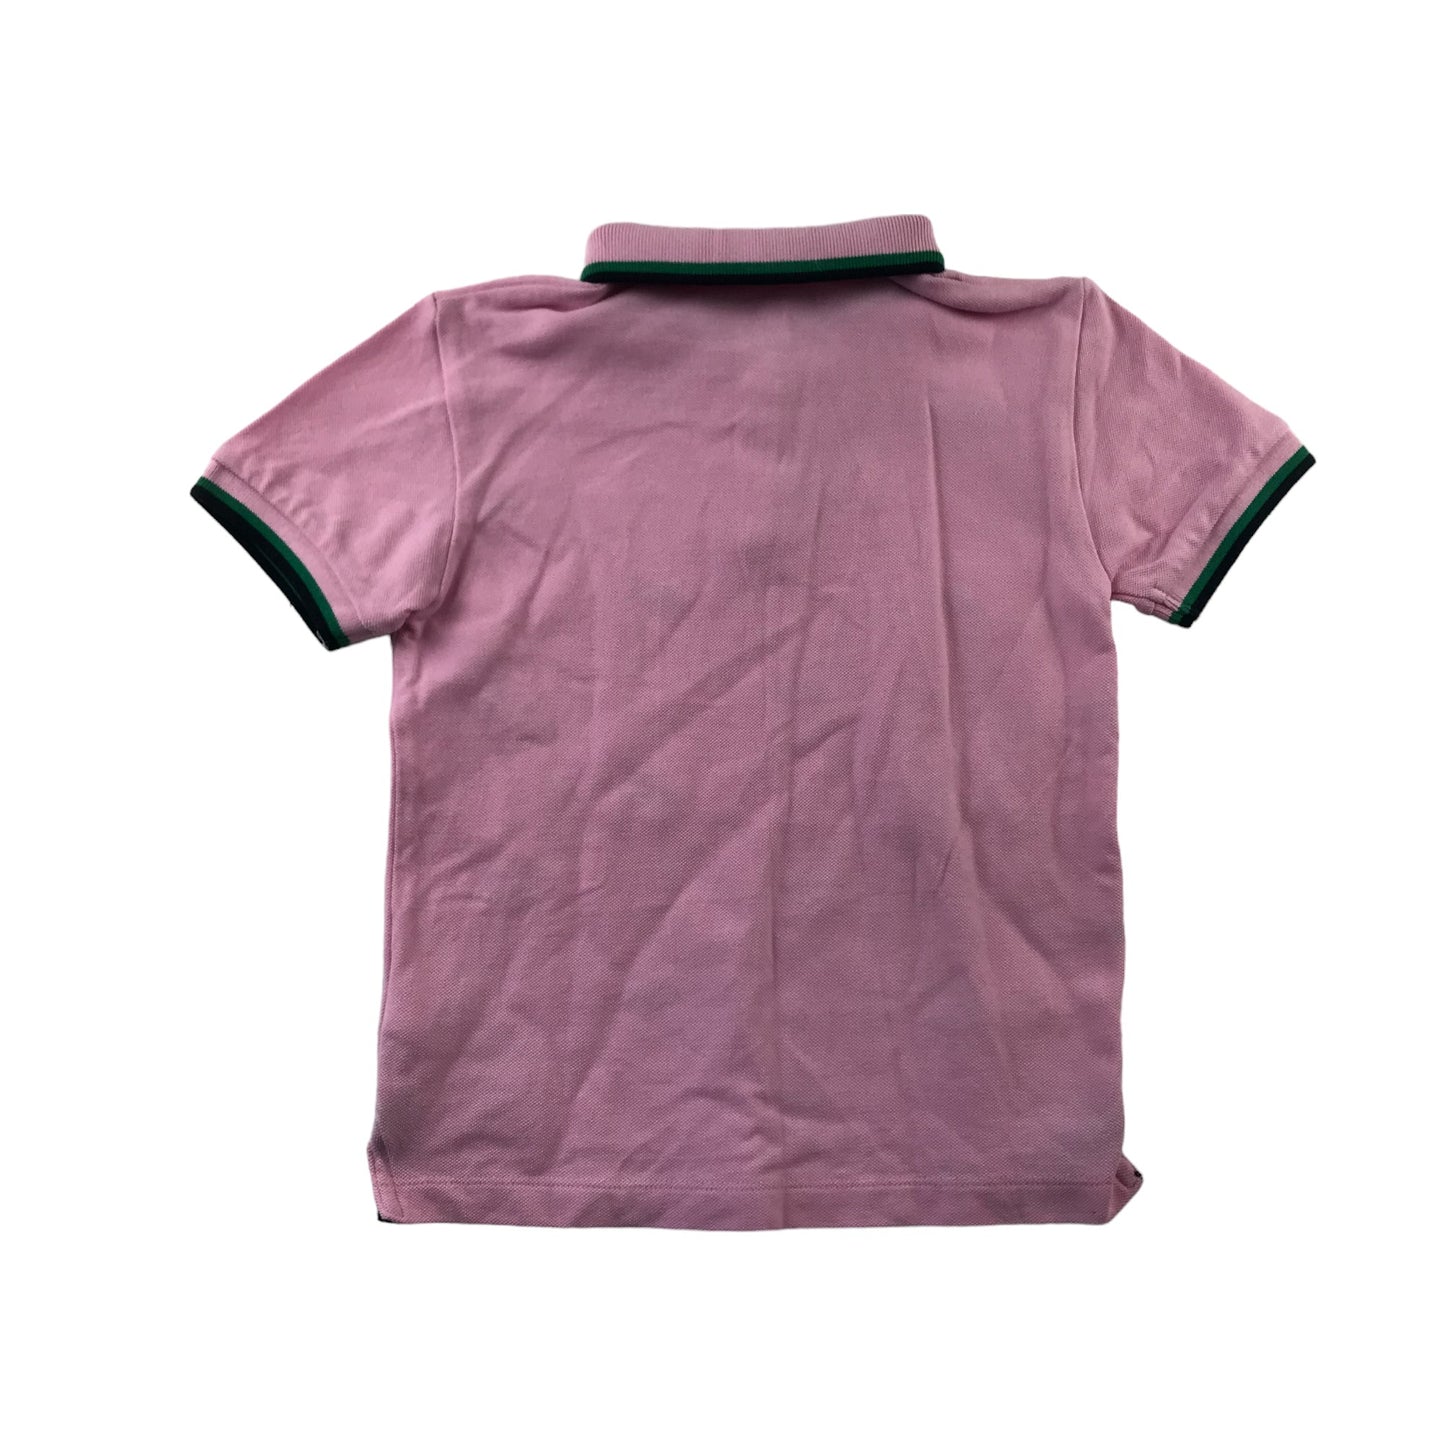 Next Polo Shirt Age 4 Pink Embroidered Car Print Cotton